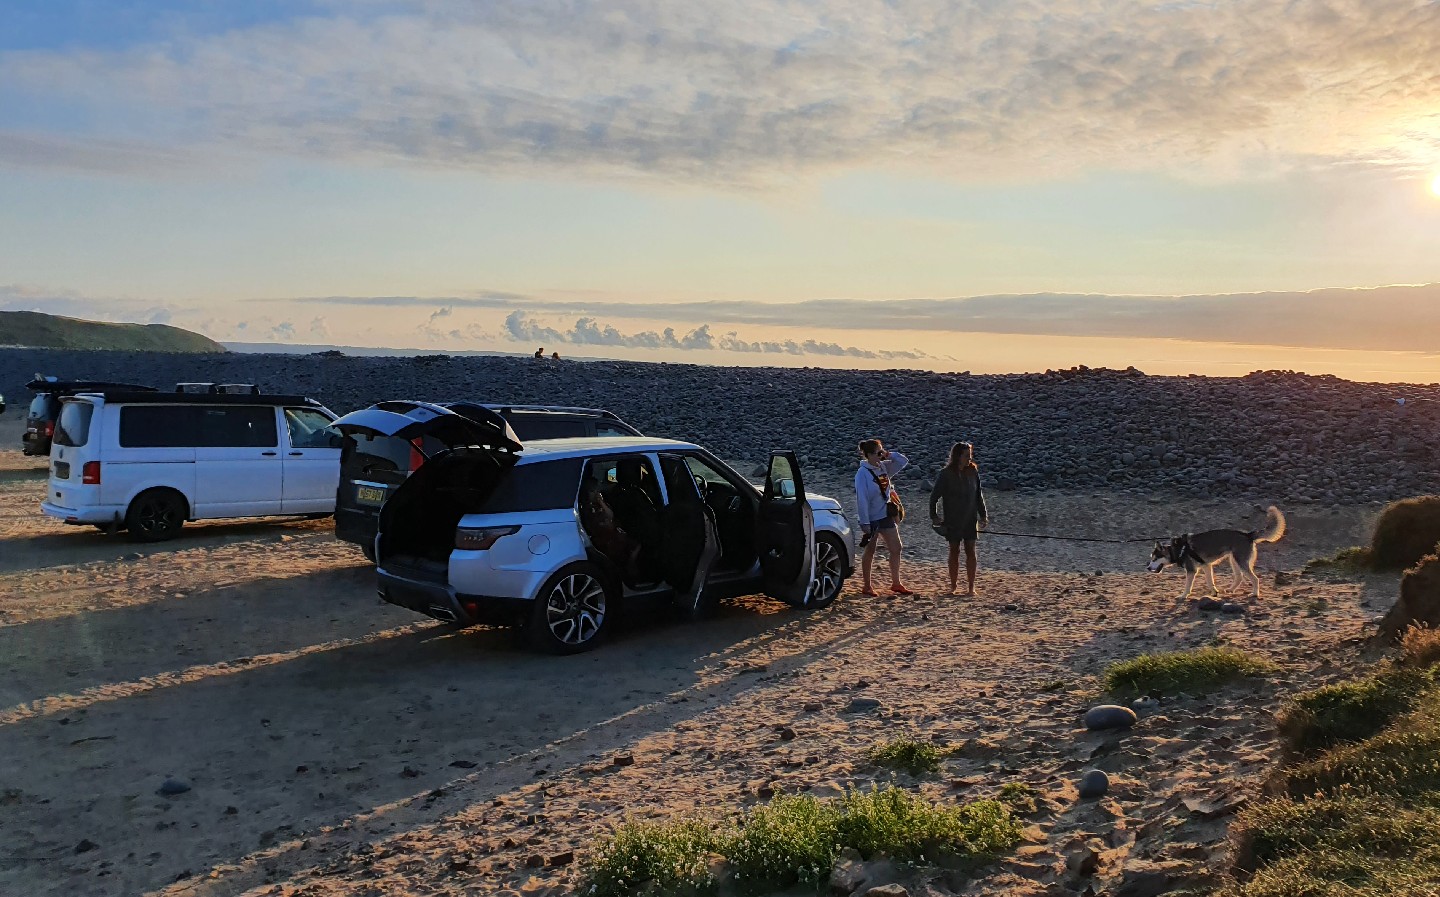 Range Rover Sport P400e plug-in hybrid 2020 beach sunset scene - long-term test review by Will Dron